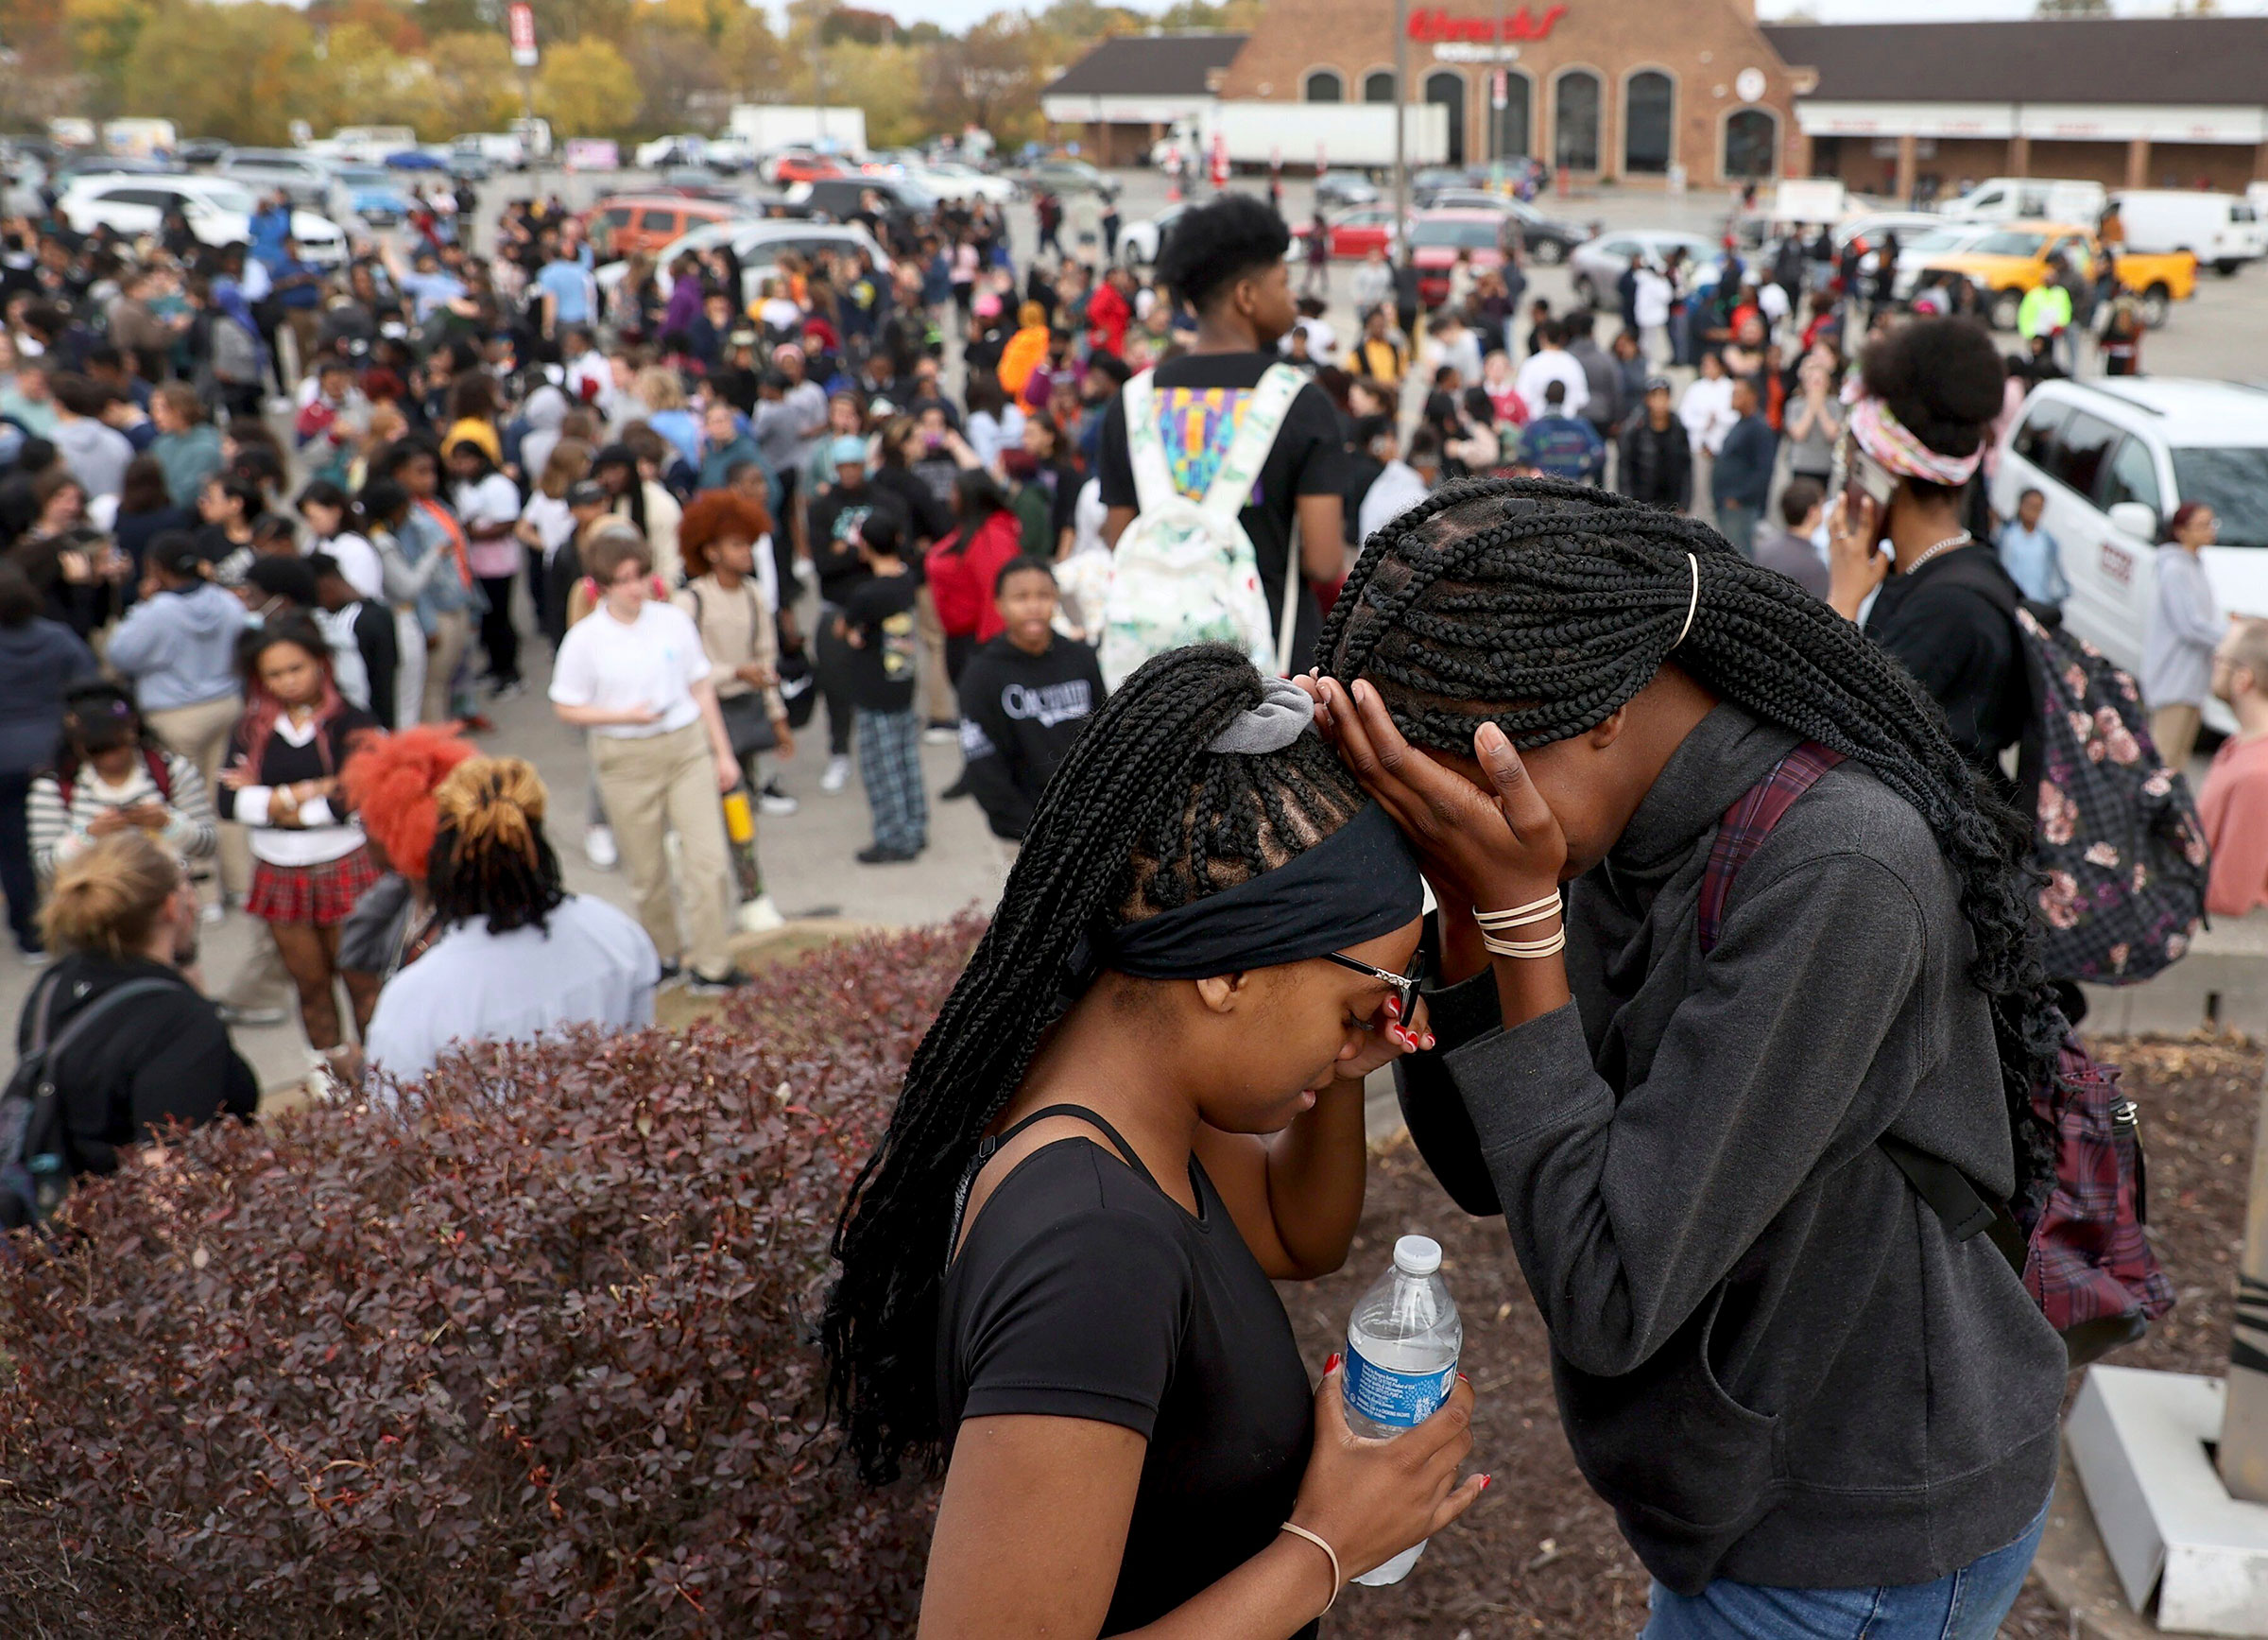 Students stand in a parking lot near the Central Visual and Performing Arts High School after a reported shooting at the school in St. Louis, on Oct. 24. (David Carson—St. Louis Post-Dispatch/AP)